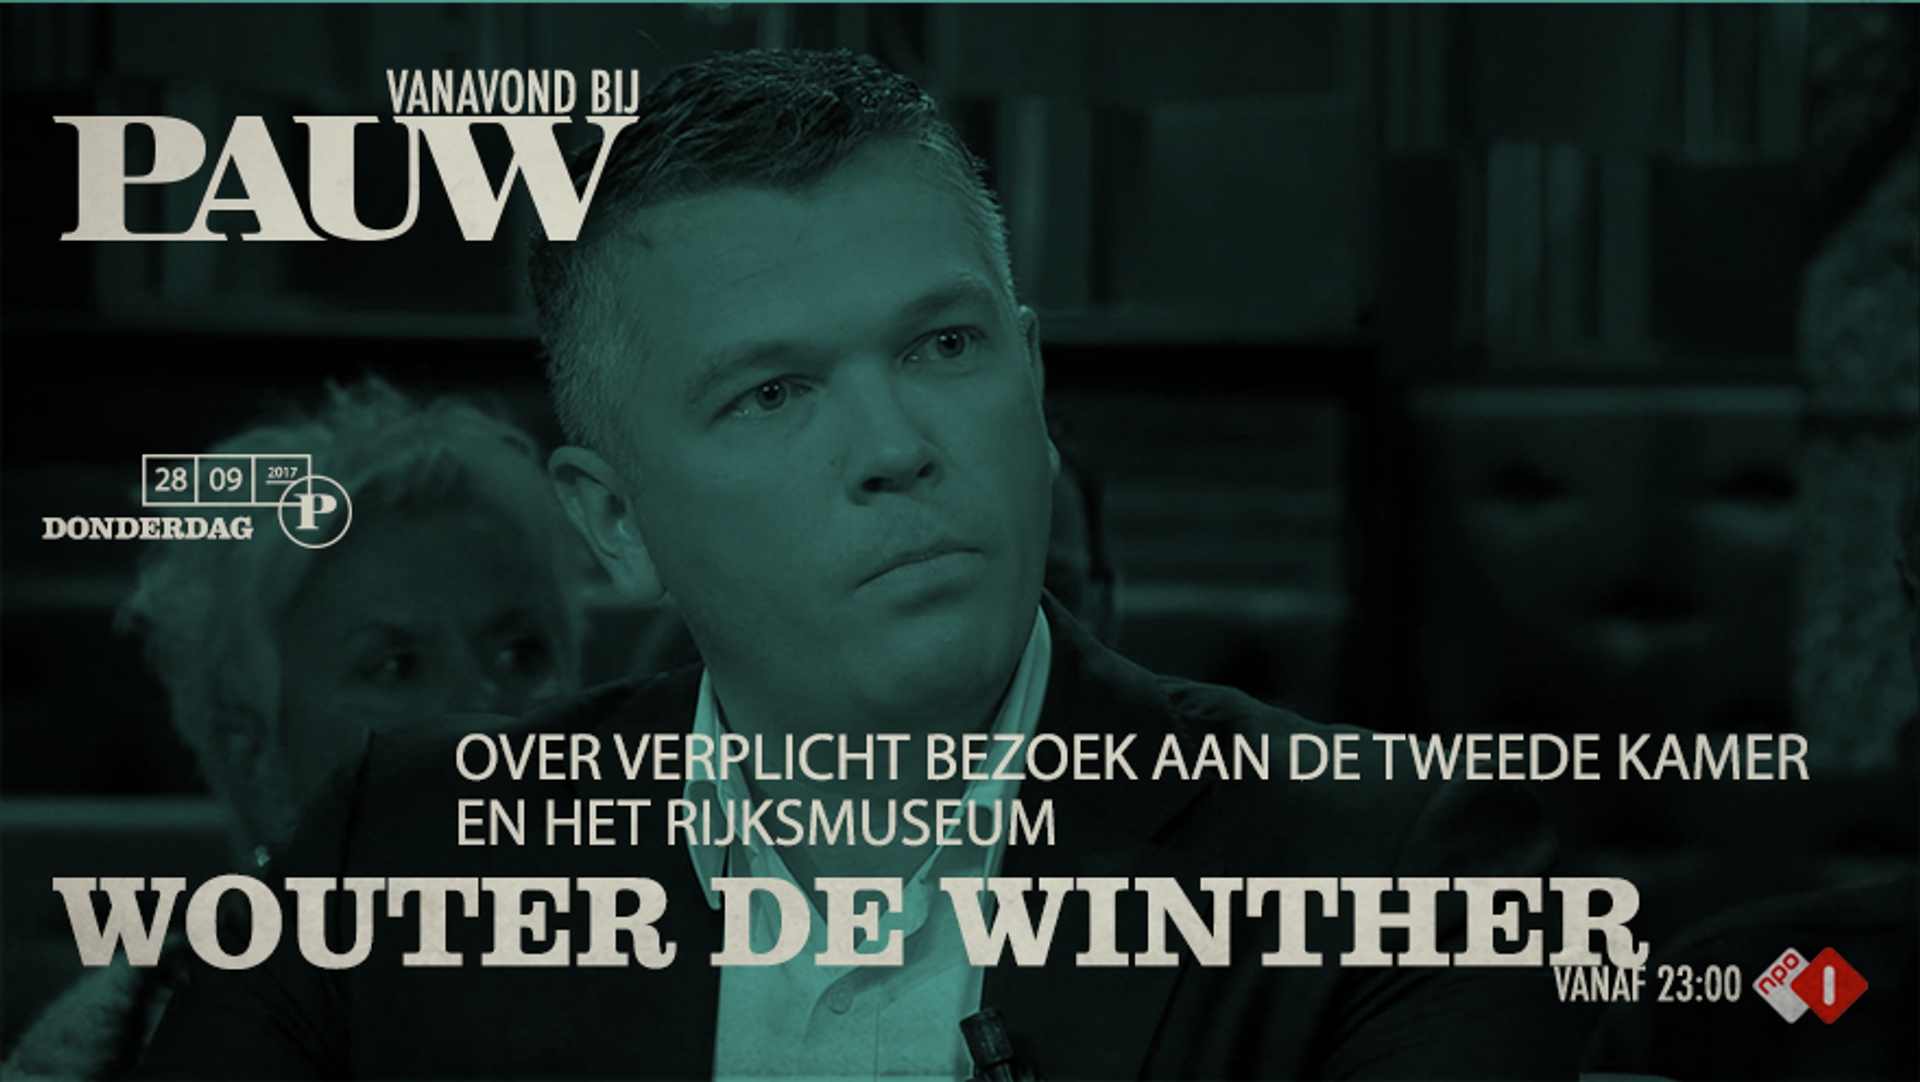 Wouter de Winther template